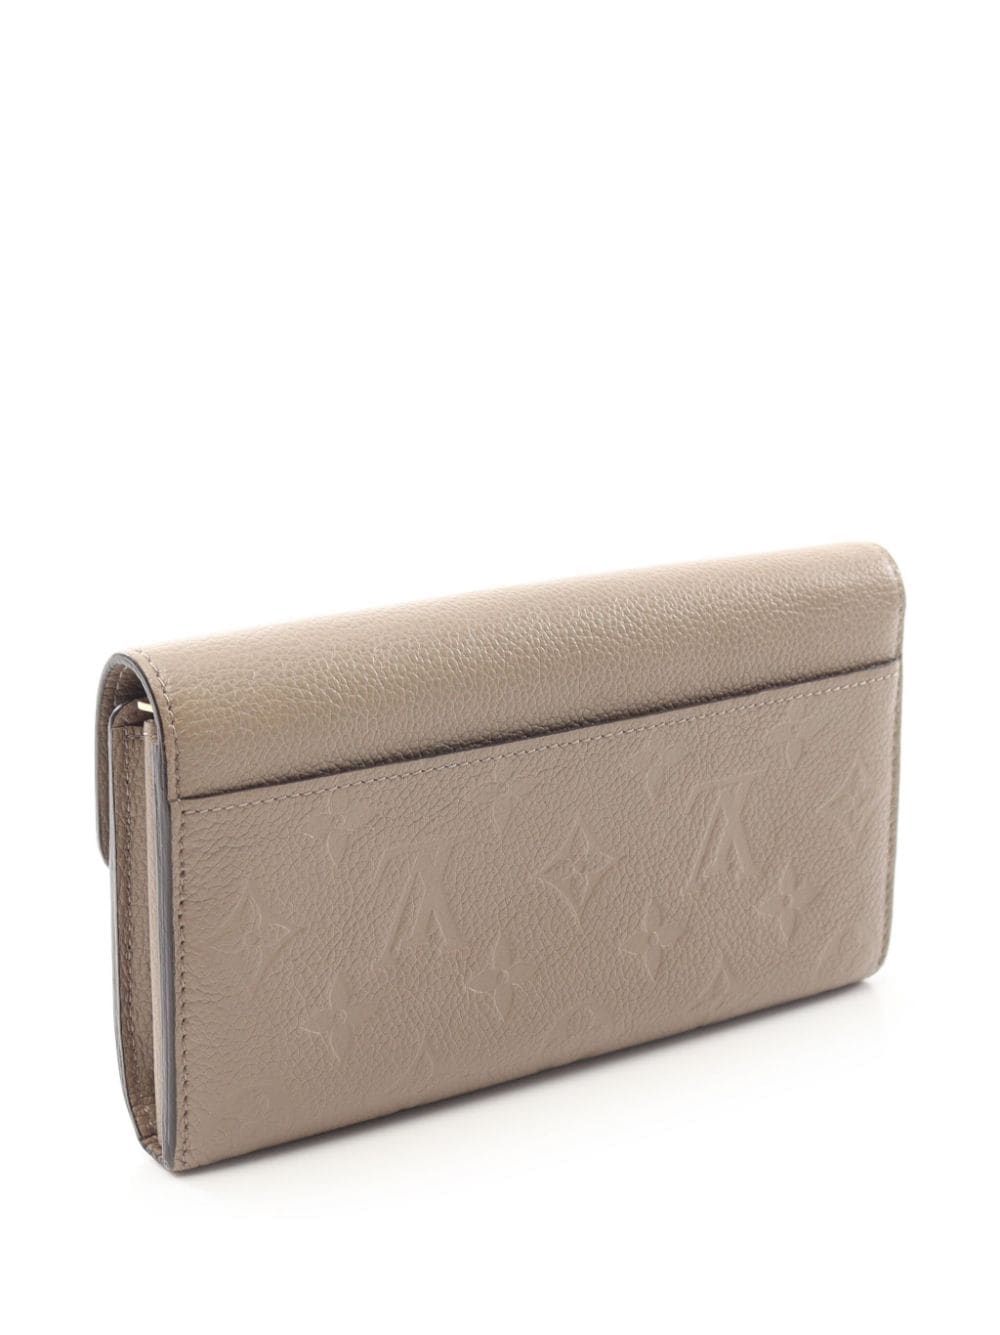 LOUIS VUITTON Daily Organizer Wallet M60679｜Product  Code：2100800355978｜BRAND OFF Online Store